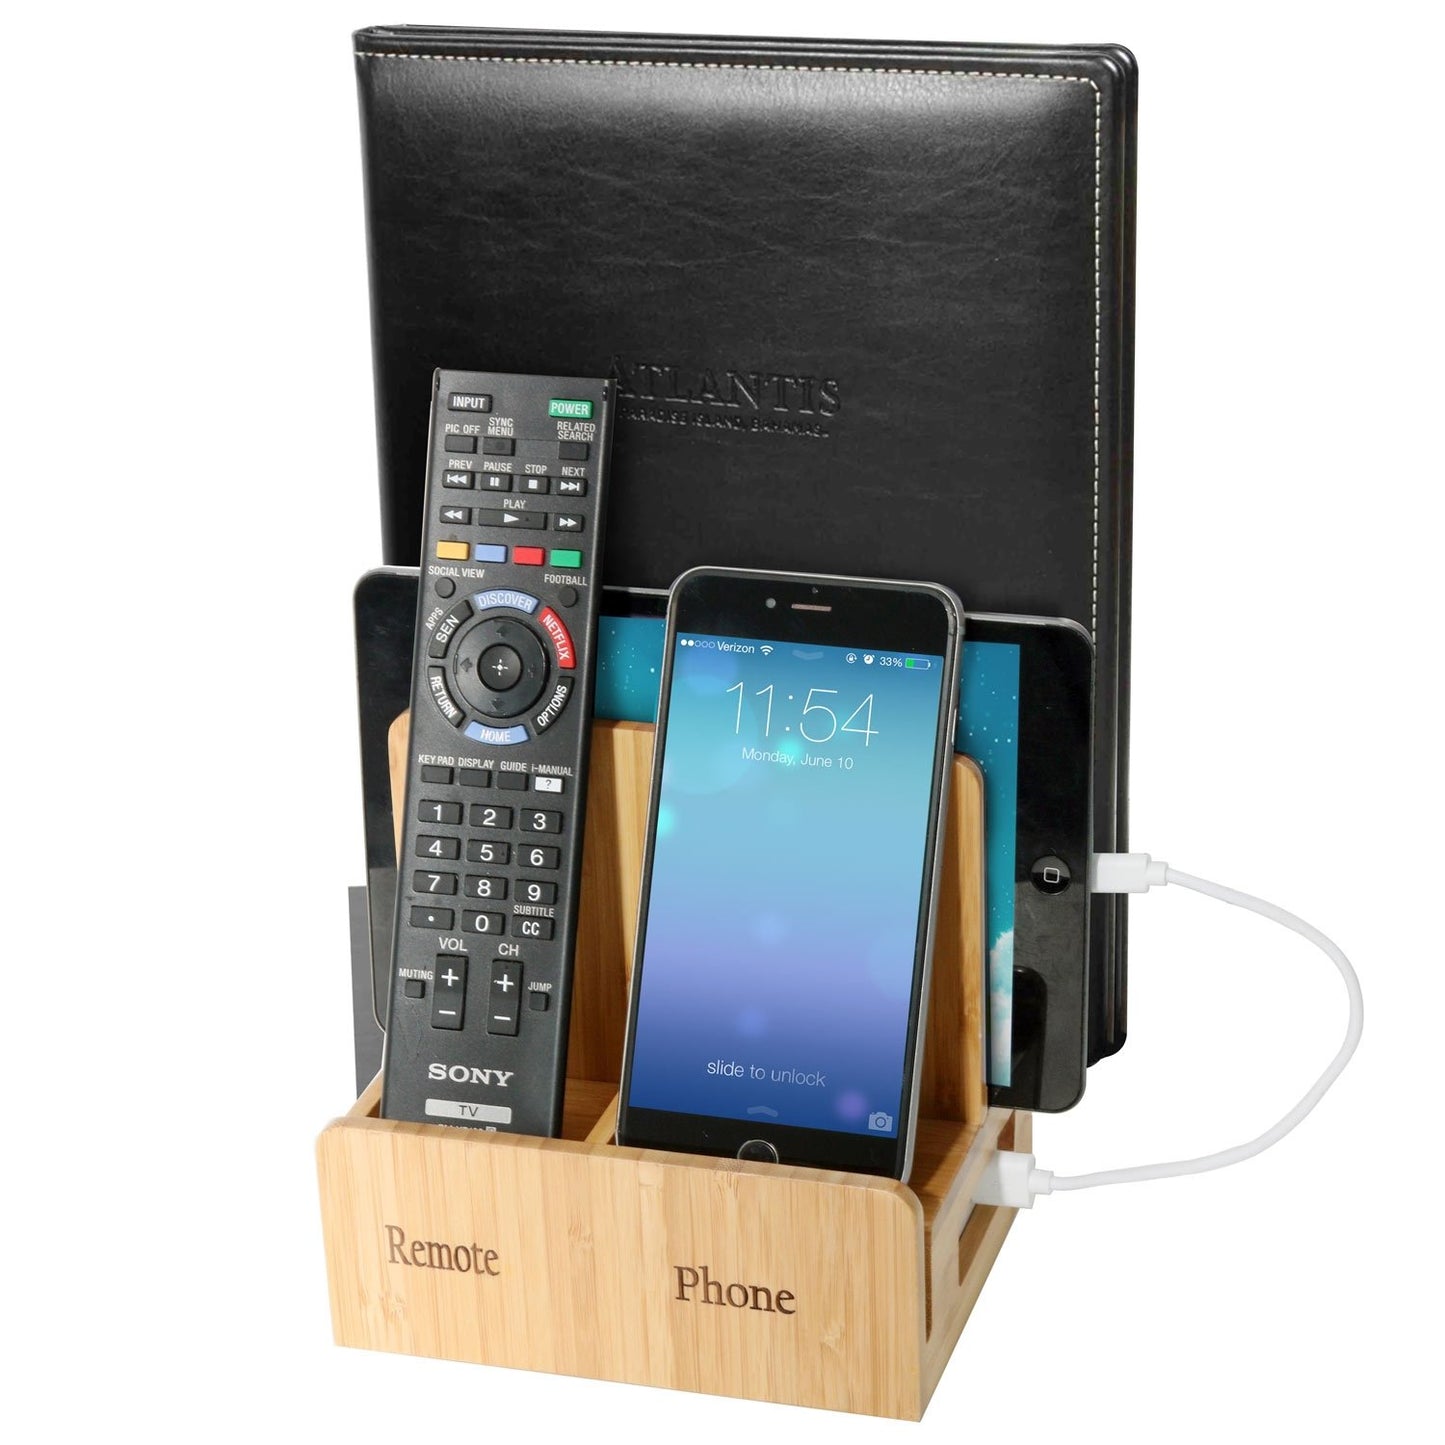 Remote phone compact + USB Powerstrip - Bamboo